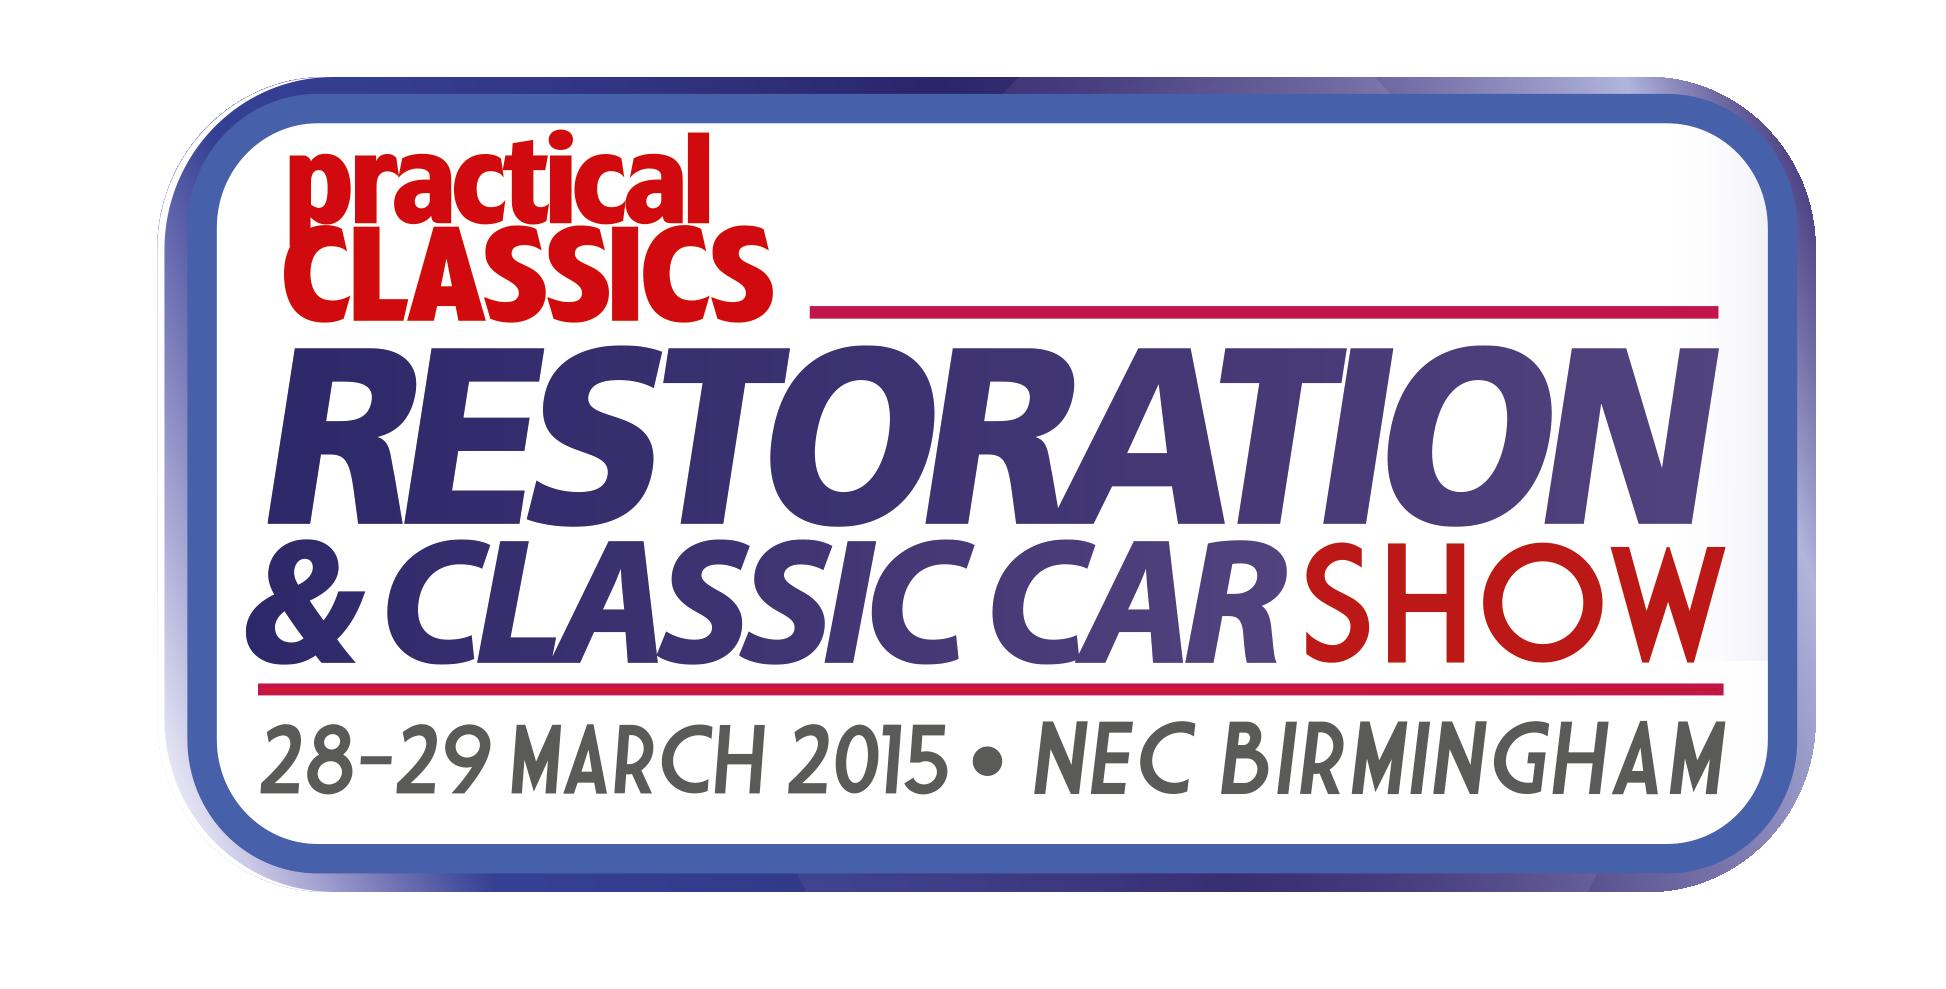 Win free tickets to the PC Restoration & Classic Car Show